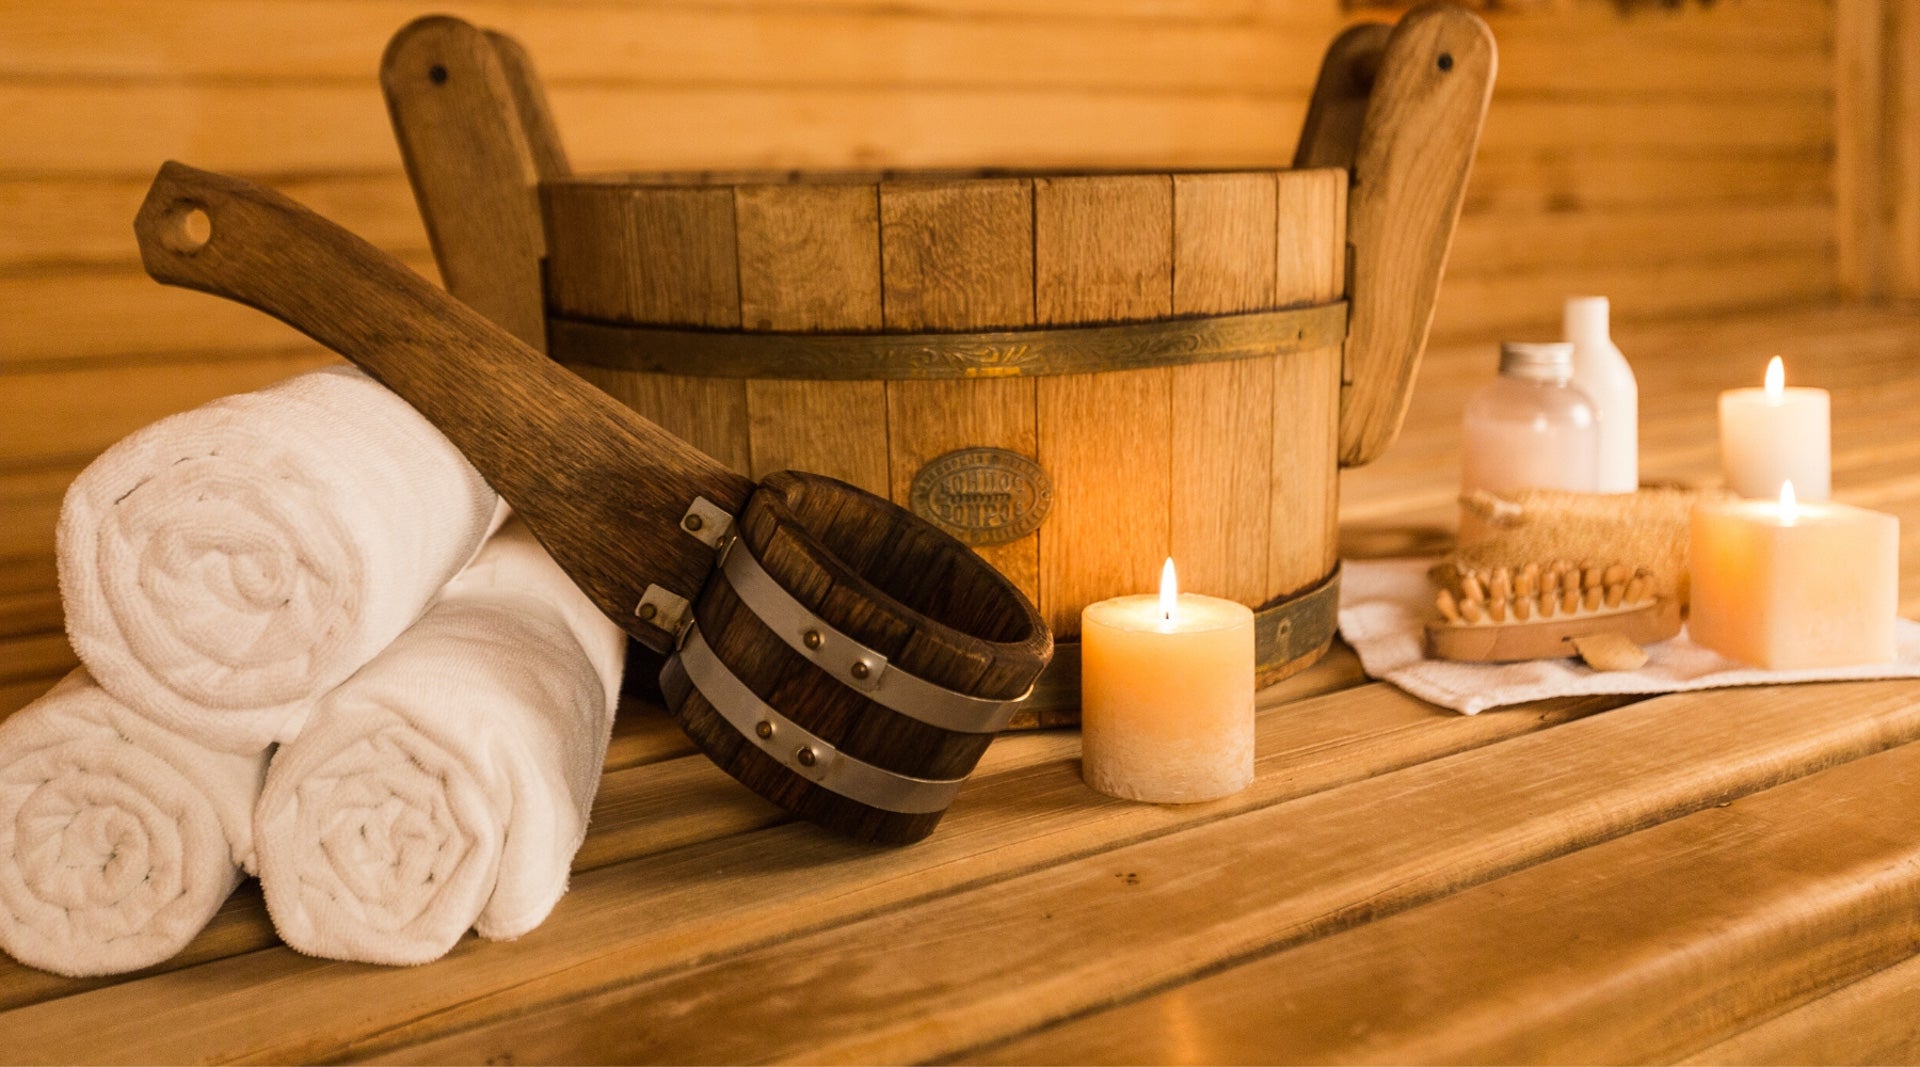 Sauna Kit Including Towels, Bucket and Ladle, Candles, Body Brush and Liquid Soap